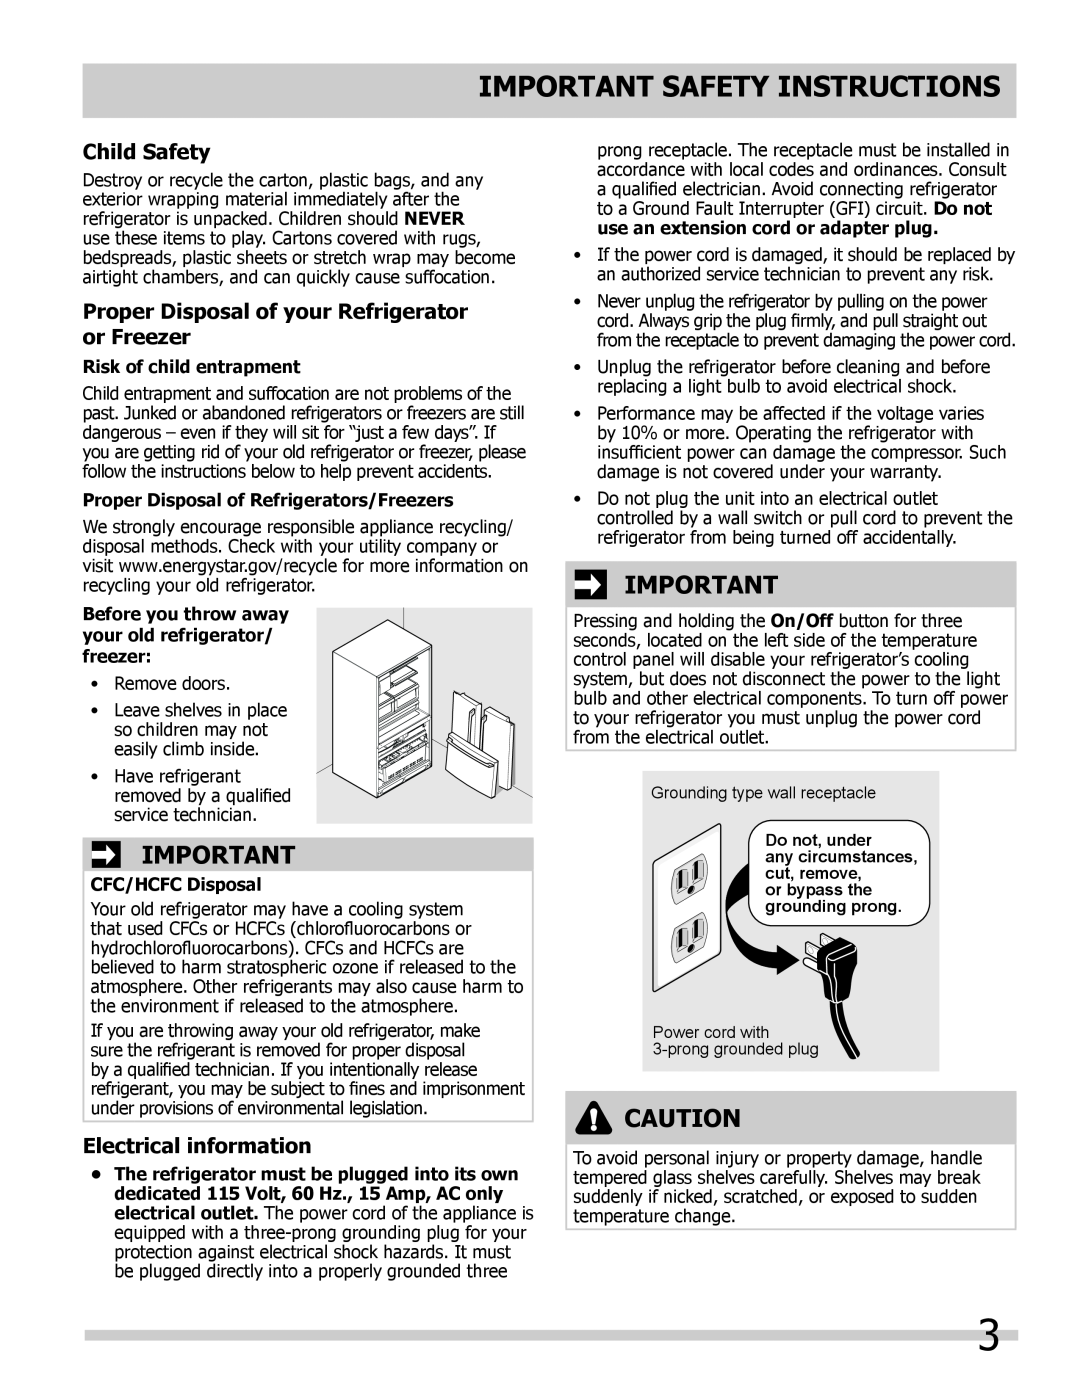 Frigidaire 242292000 Child Safety, Proper Disposal of your Refrigerator or Freezer, Electrical information, Do not, under 